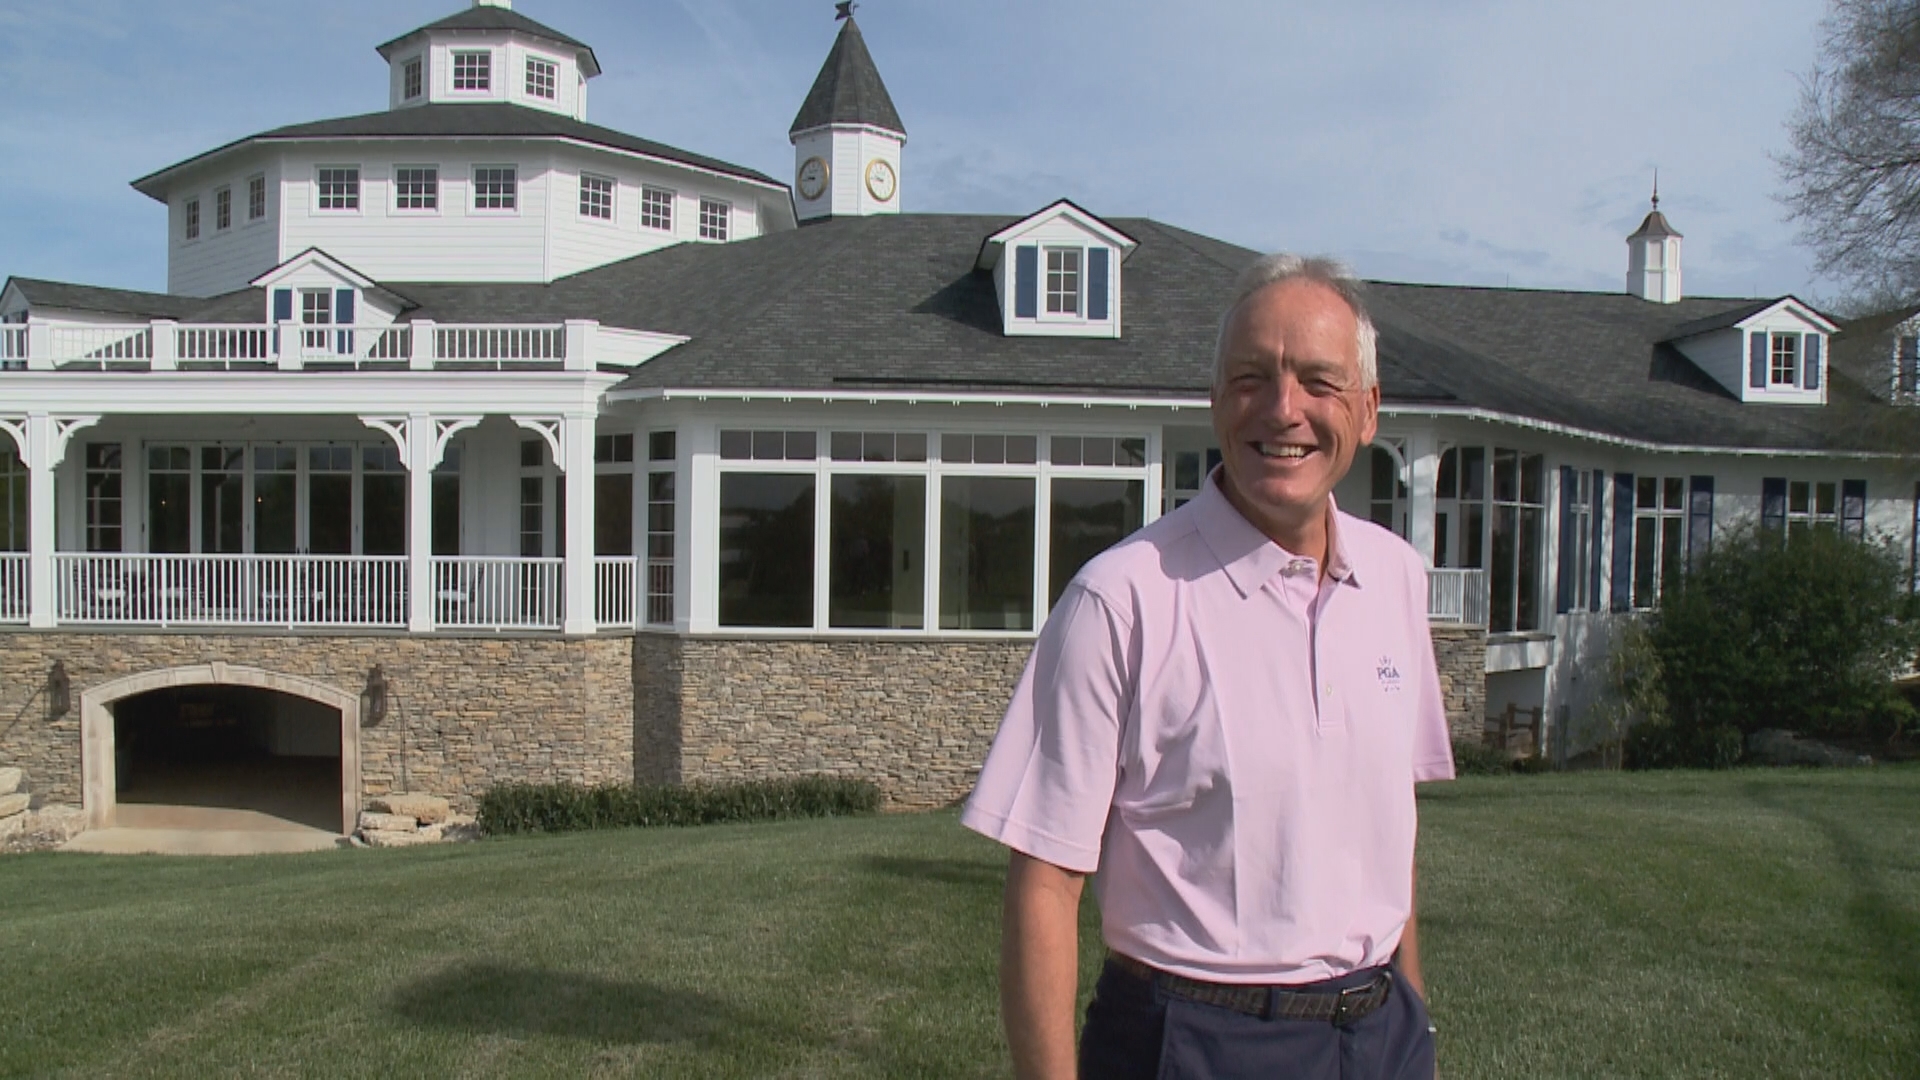 Kerry Haigh has examined every detail of Valhalla's golf course, redesigning what's necessary for the PGA Championship.